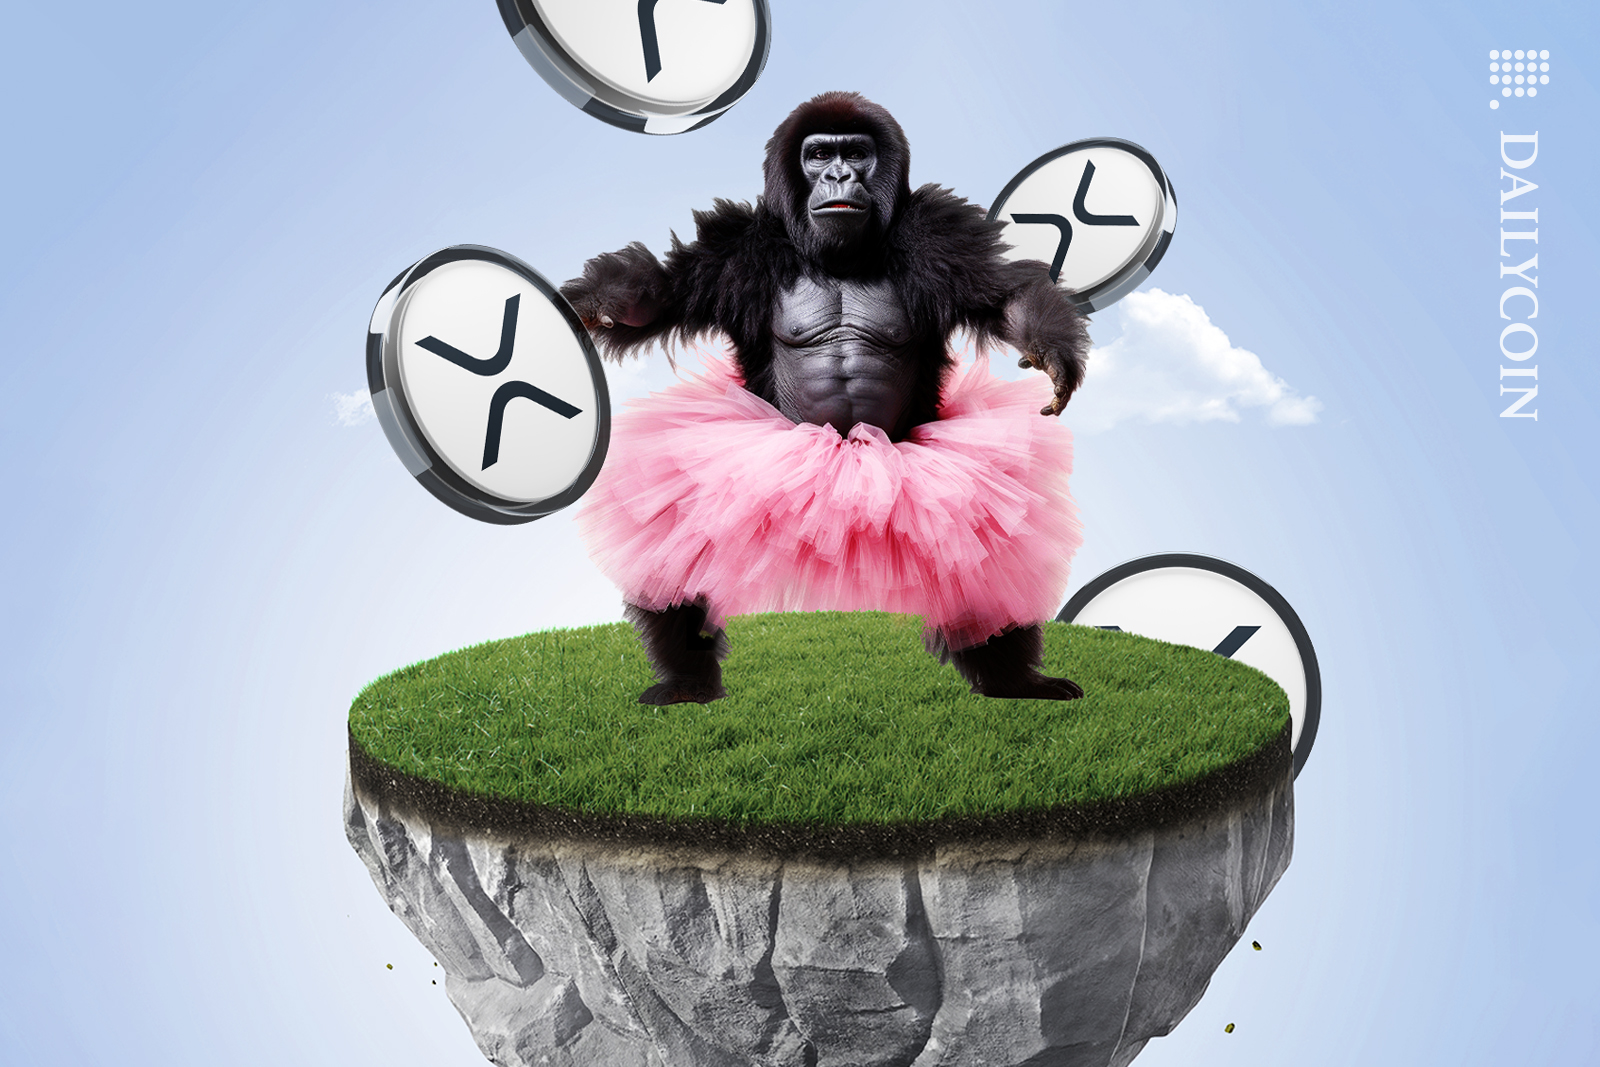 Gorilla in a tutu on has XRP coins floating.